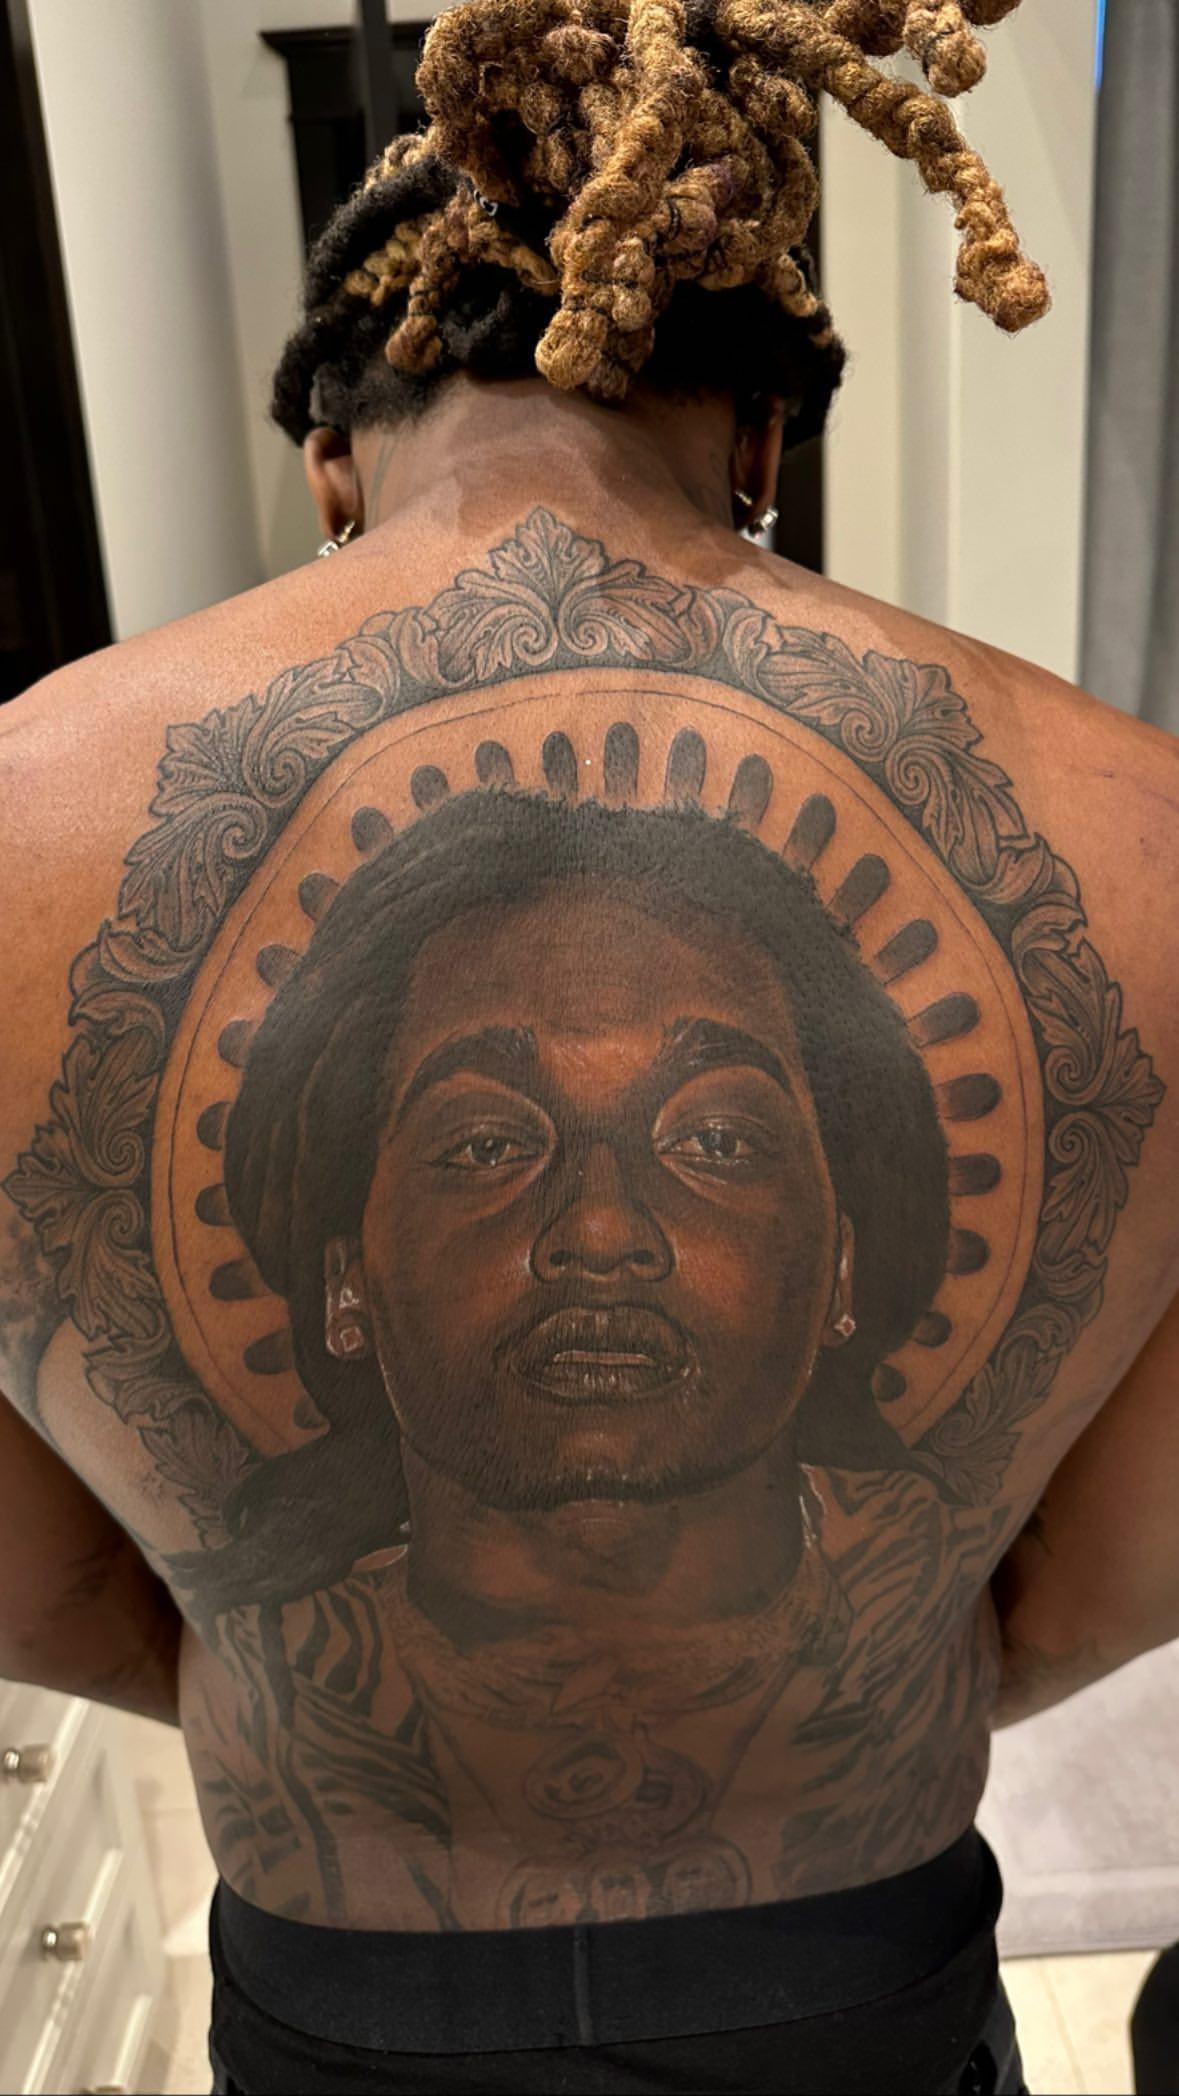 Offset Debuts Massive Back Tattoo In Honor Of The Late Takeoff